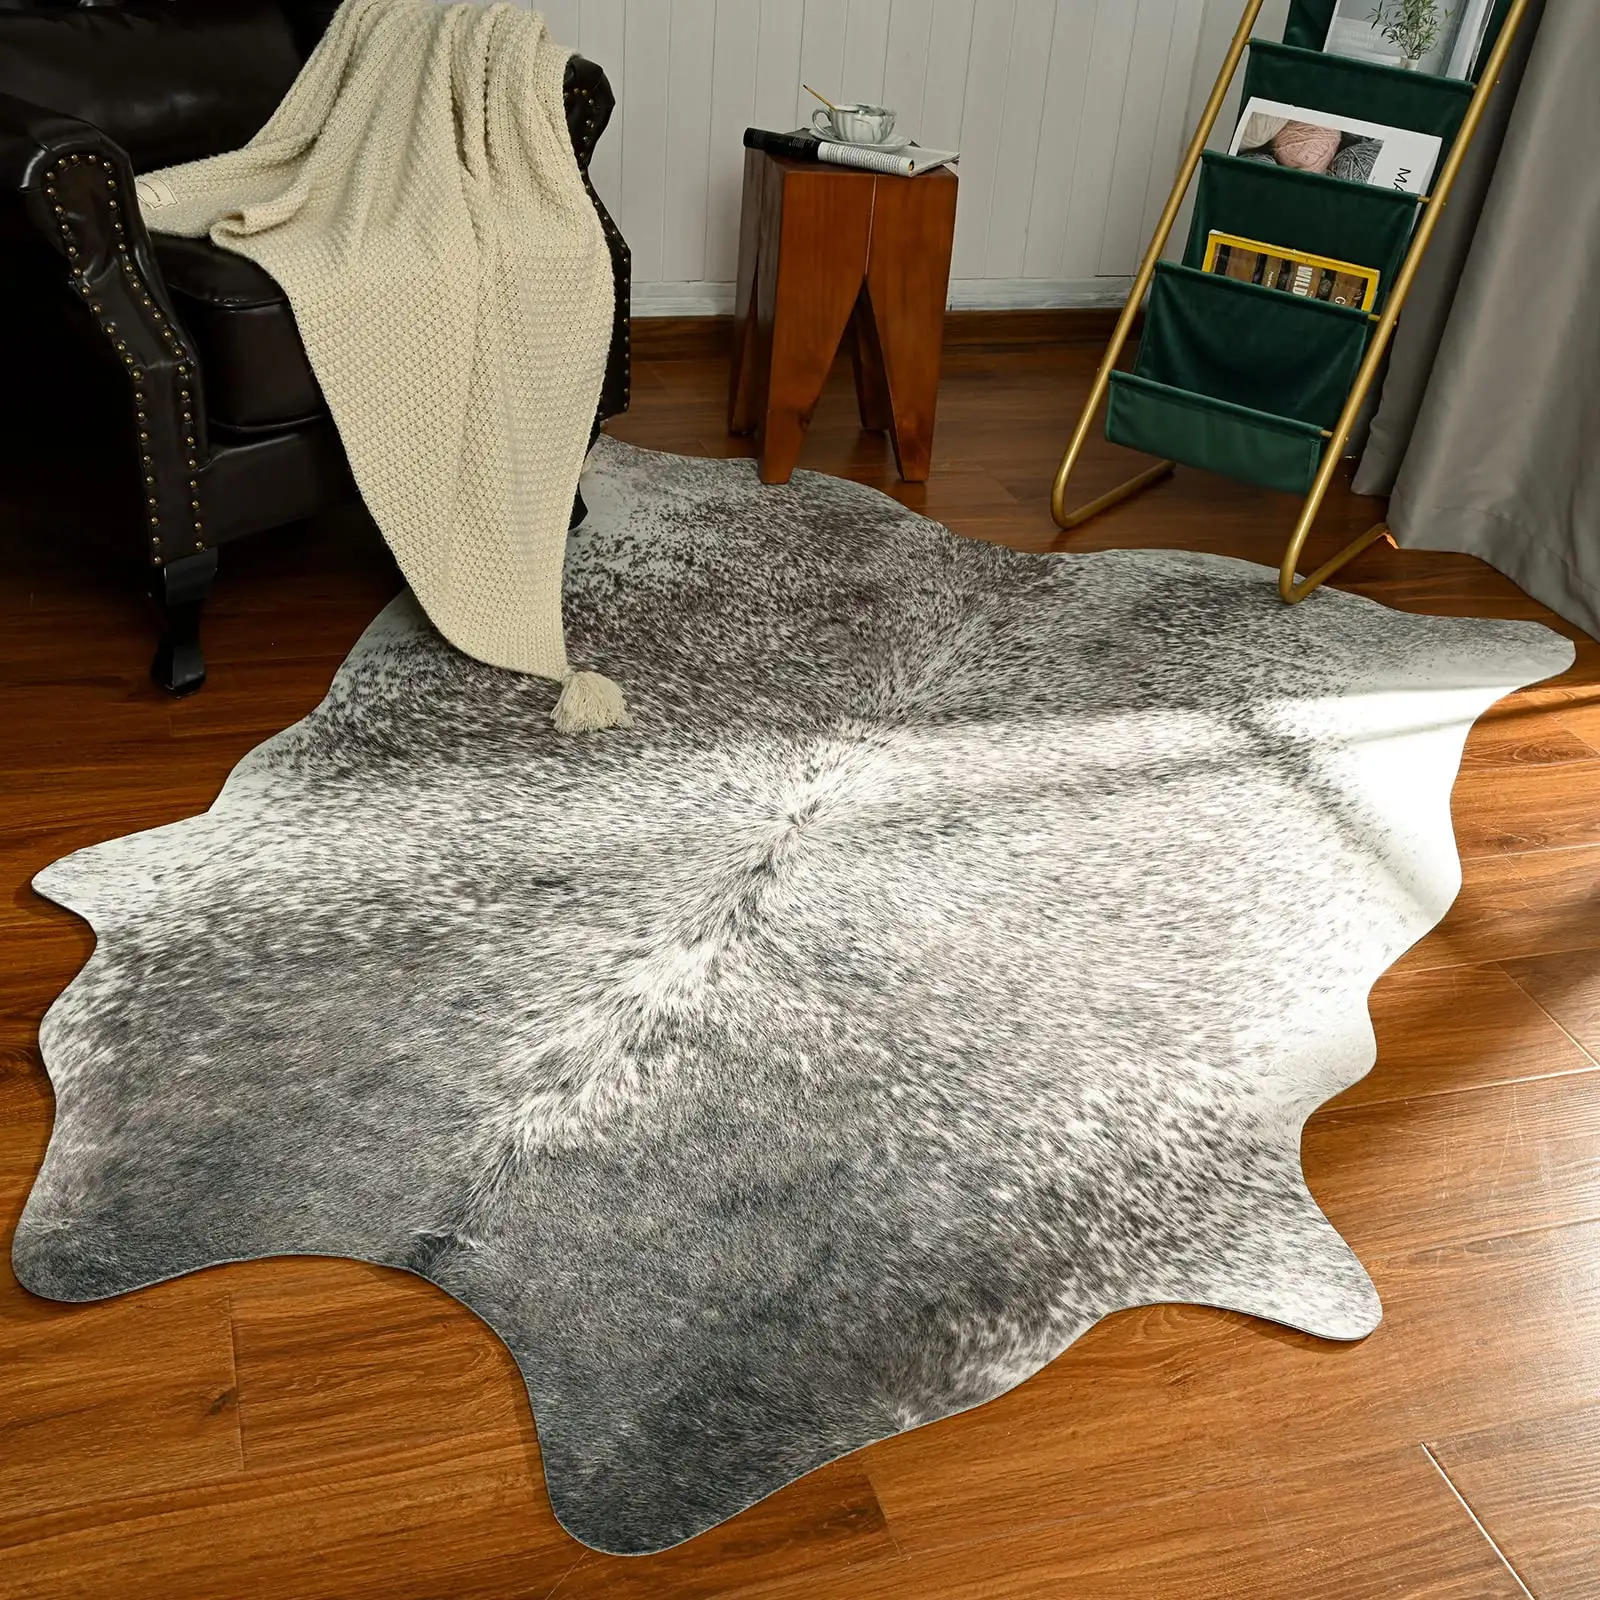 Wholesale supply full hide natural cow skins with hair on large size custom dyed cowhides for carpets and rugs